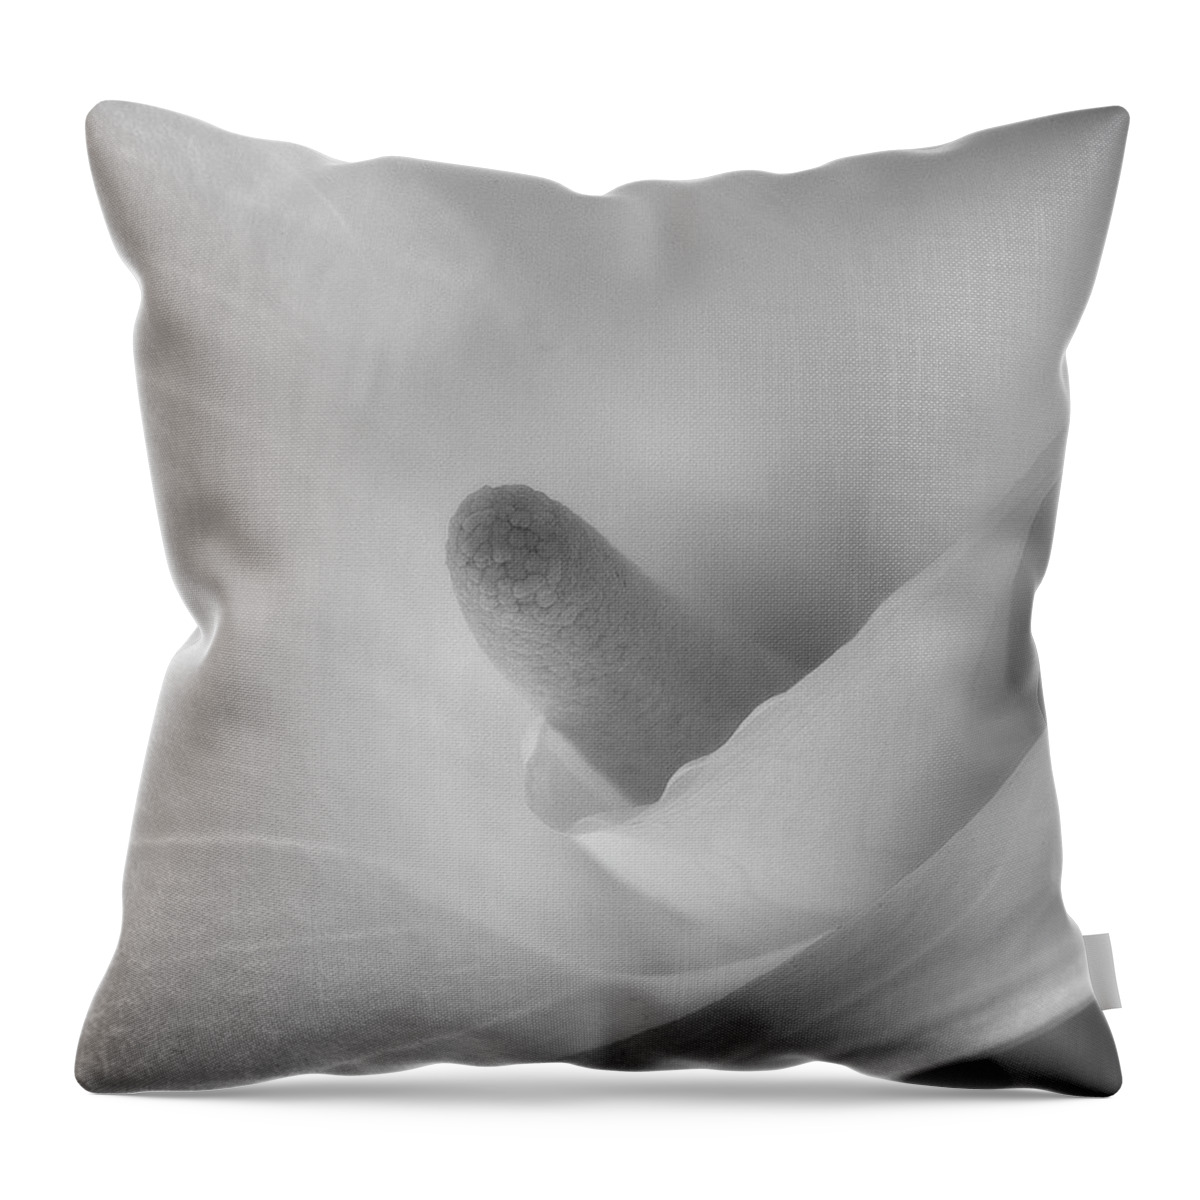 Flower Throw Pillow featuring the photograph Calla Lily by John Roach